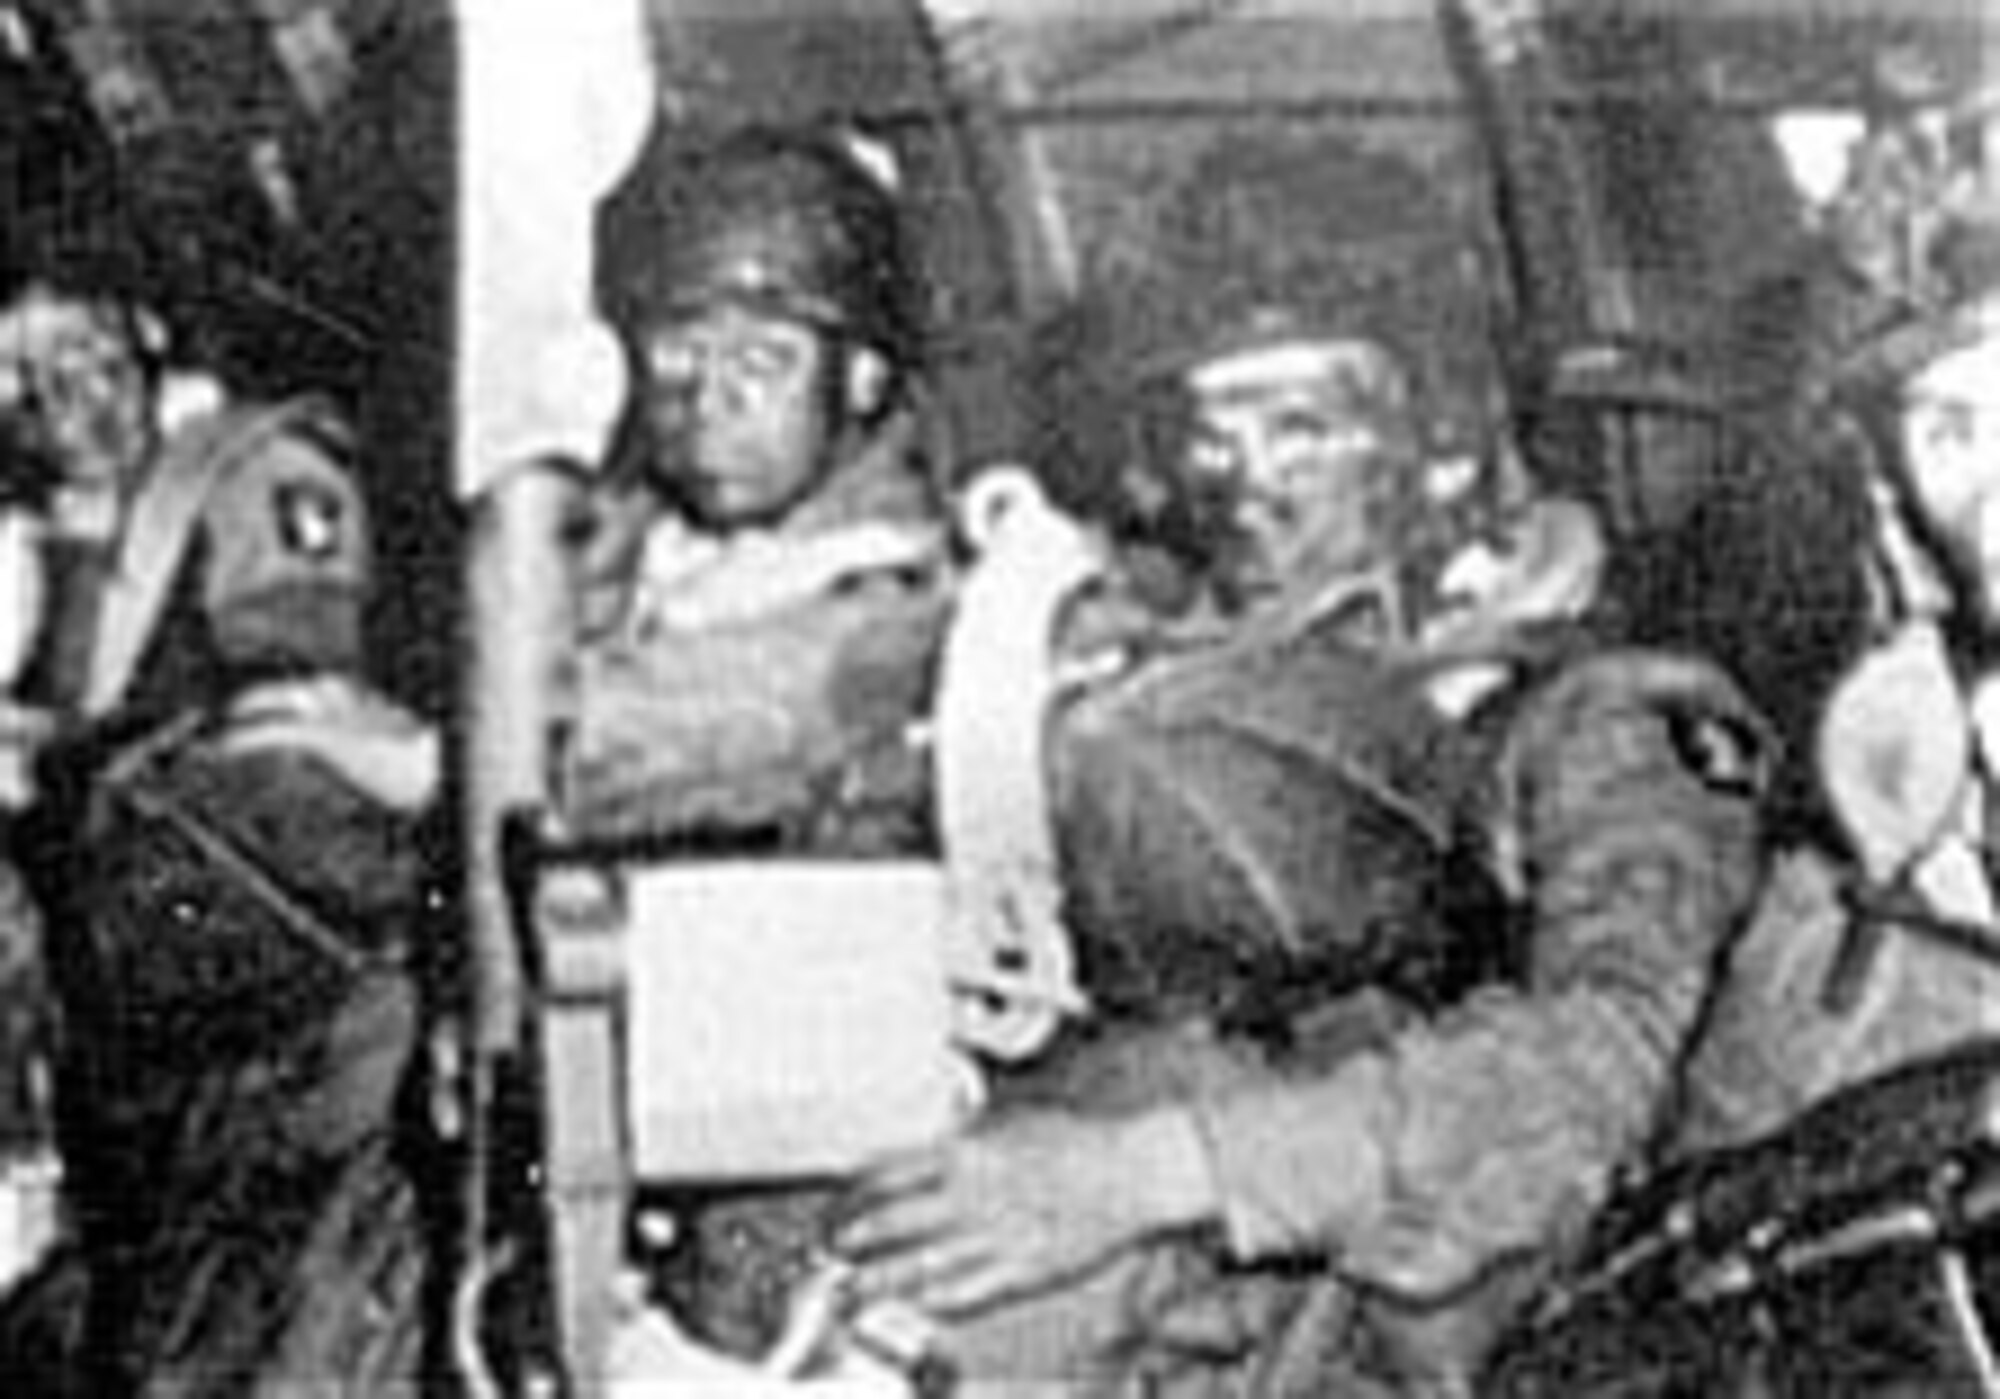 U.S. paratroopers, their faces blackened so they would be more difficult to see in the darkness, en route to their drop zone. (U.S. Air Force photo)